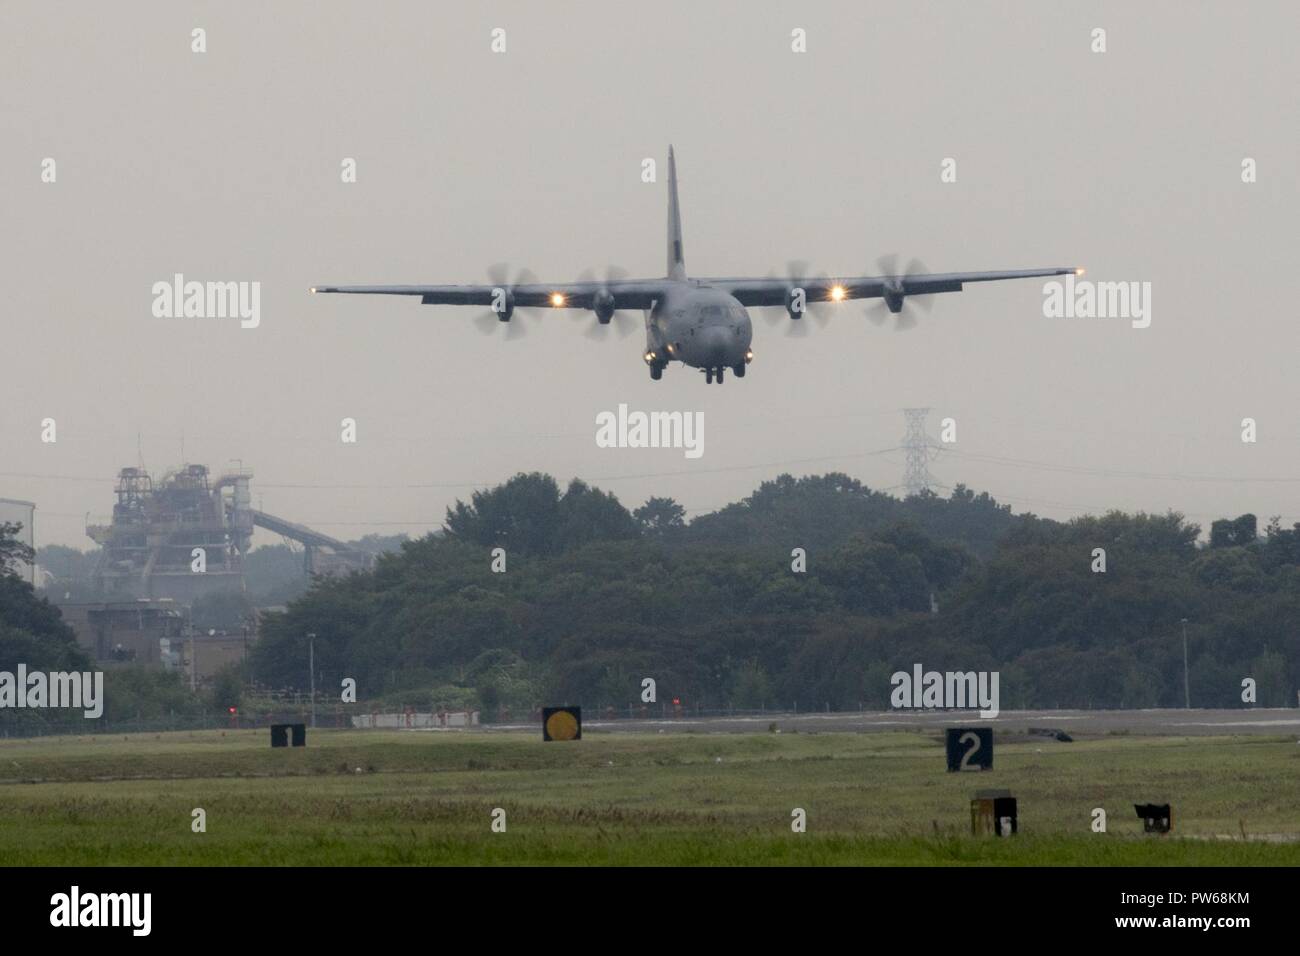 A C-130J Super Hercules approaches the runway at Yokota Air Base, Japan, Sept. 20, 2017. This is the fifth C-130J delivered to Yokota and the first from Ramstein Air Base, Germany. Crewmembers from the 36th Airlift Squadron flew halfway around the world to deliver this C-130J here. Stock Photo